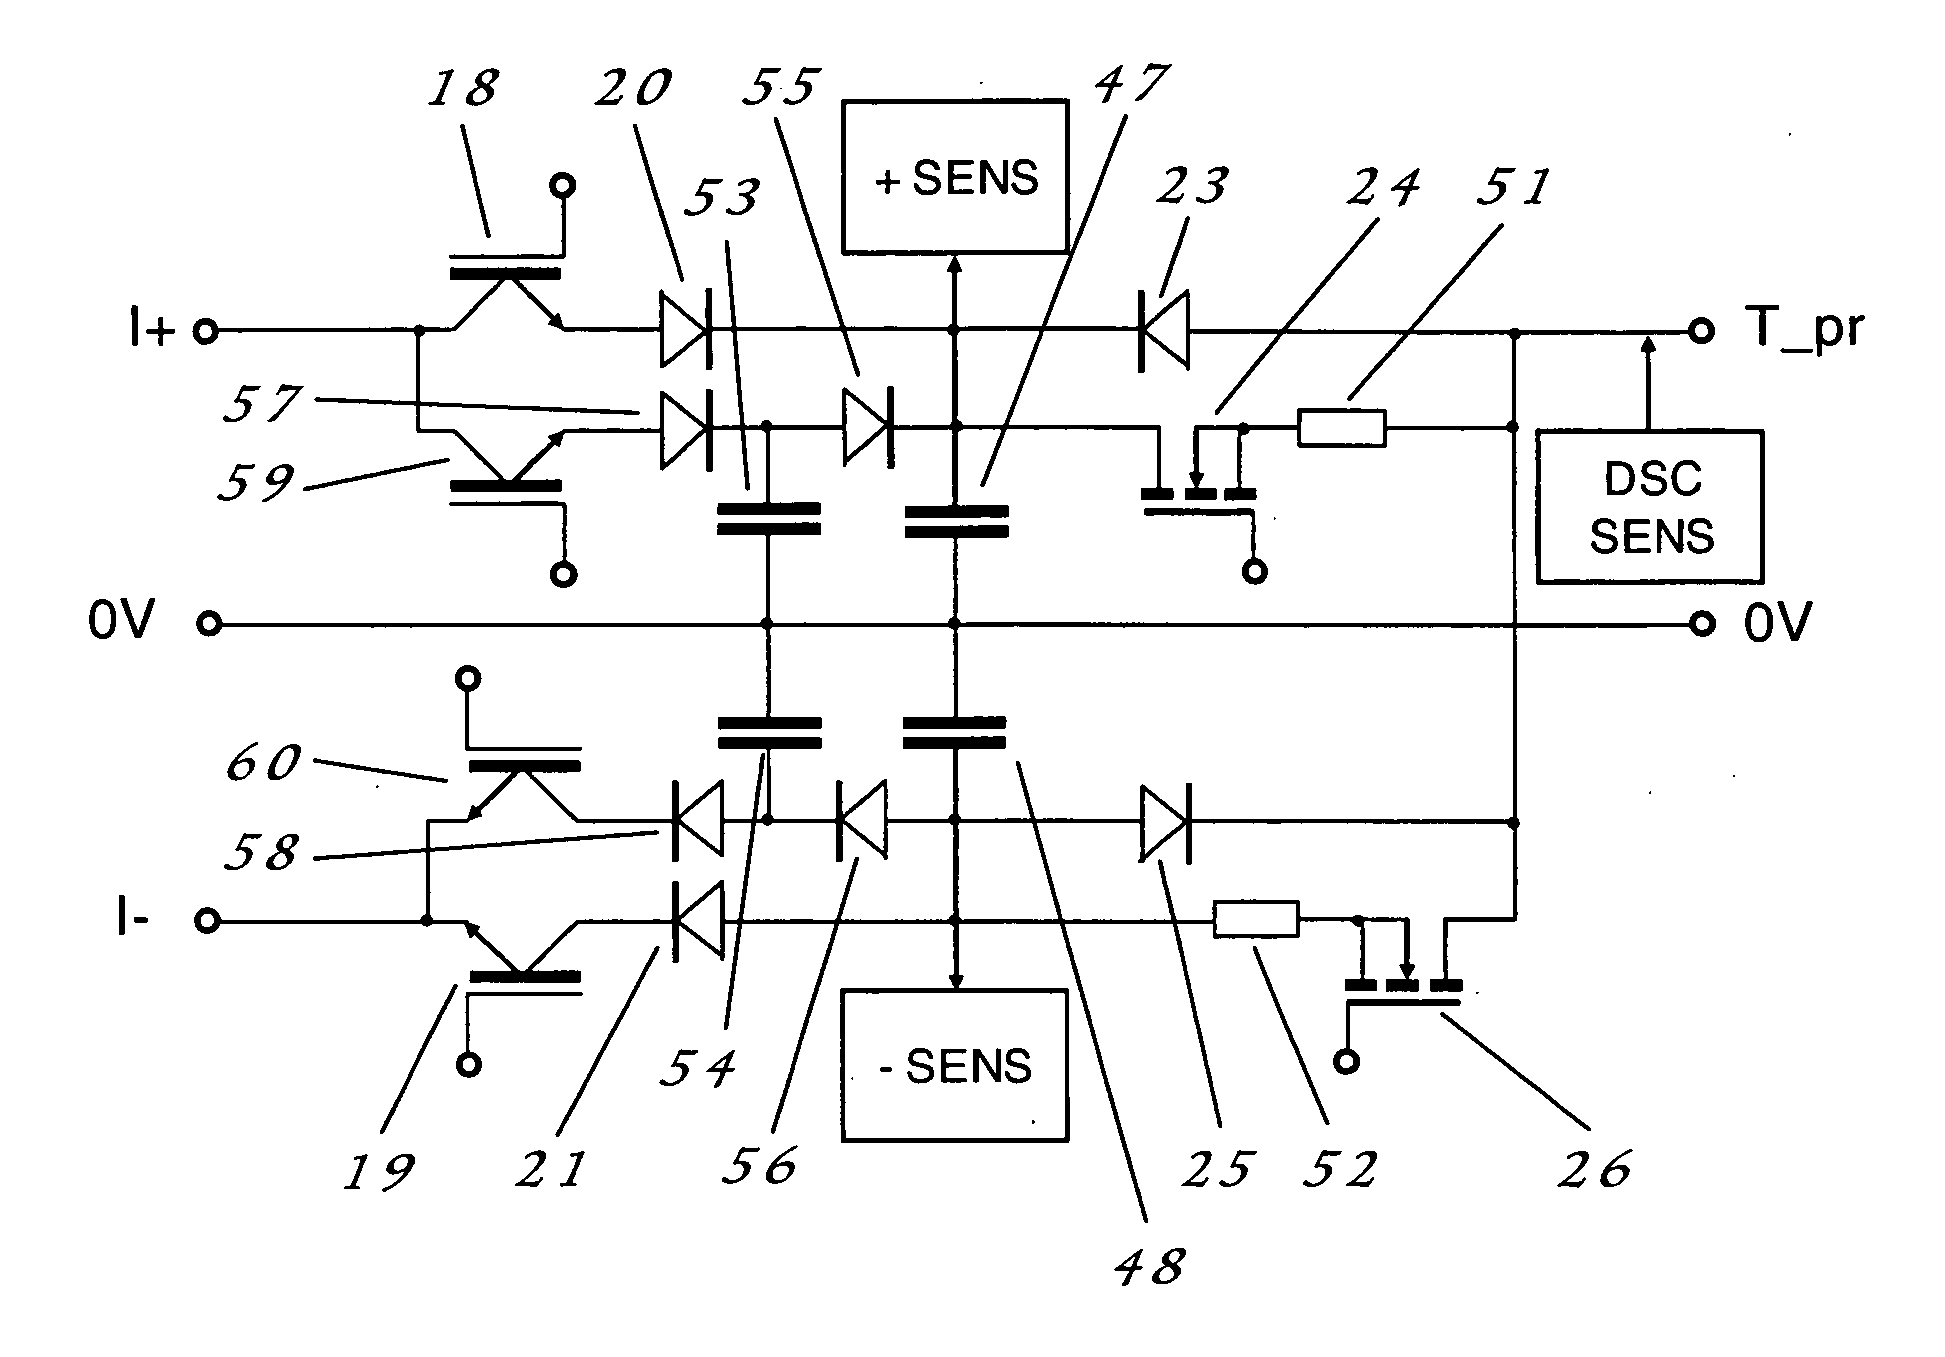 Method and generator for electrical discharge machining